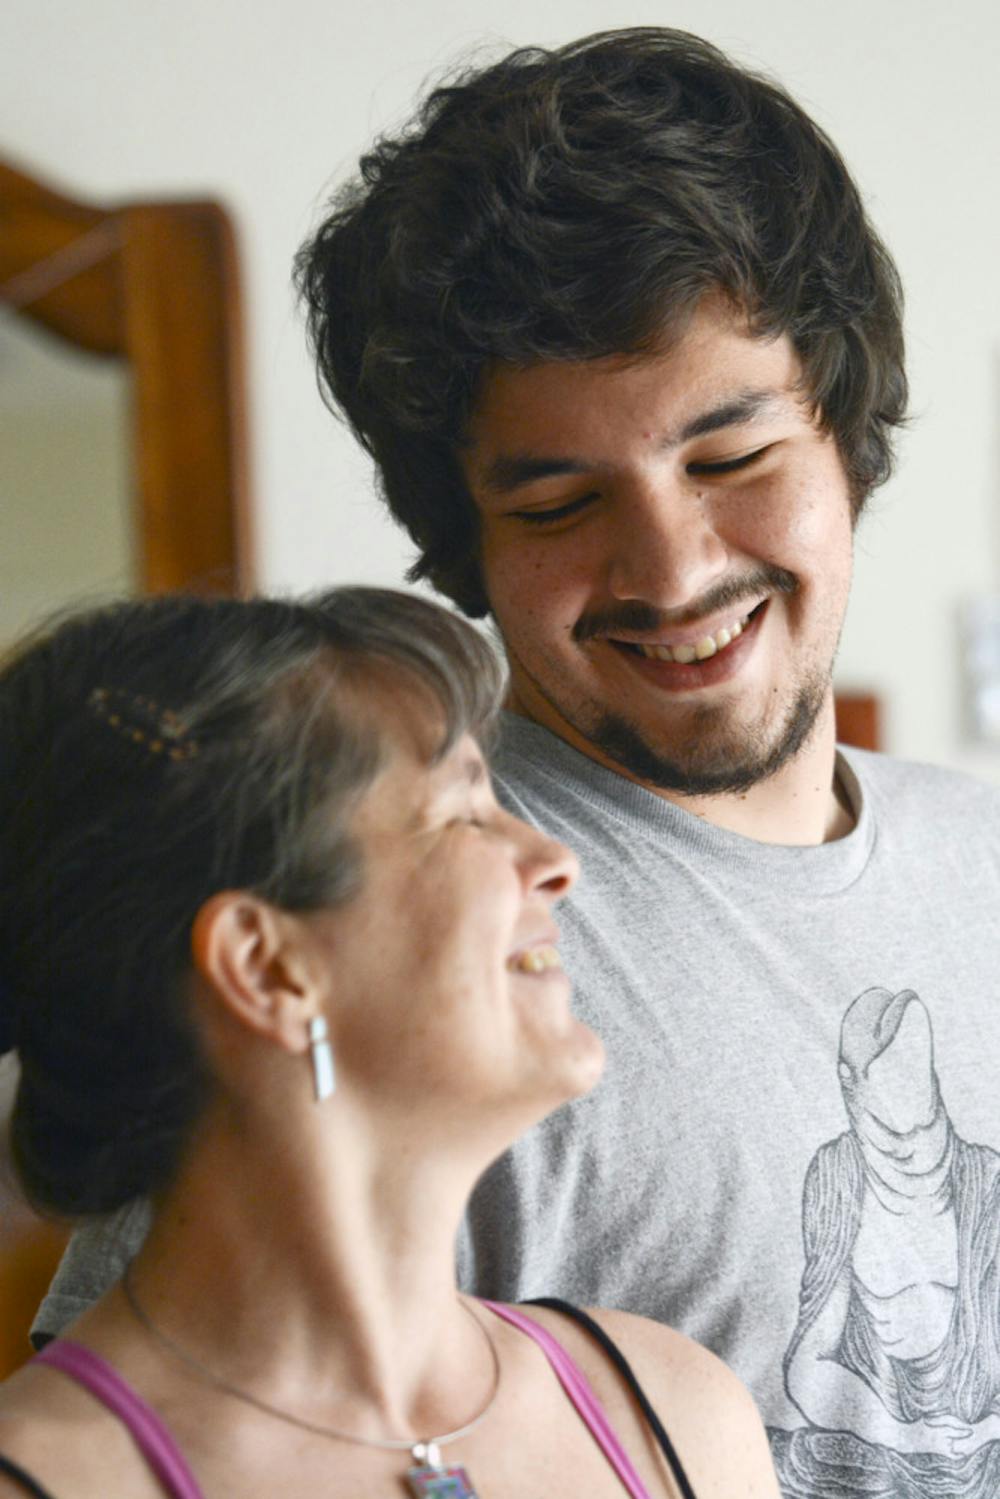 <p>Claudia Castagliola, 45, laughs with her eldest son, Cristobal Gonzalez, 23, in her home’s living room. The two will graduate from a PhD program and a Master’s program, respectively, this week.</p>